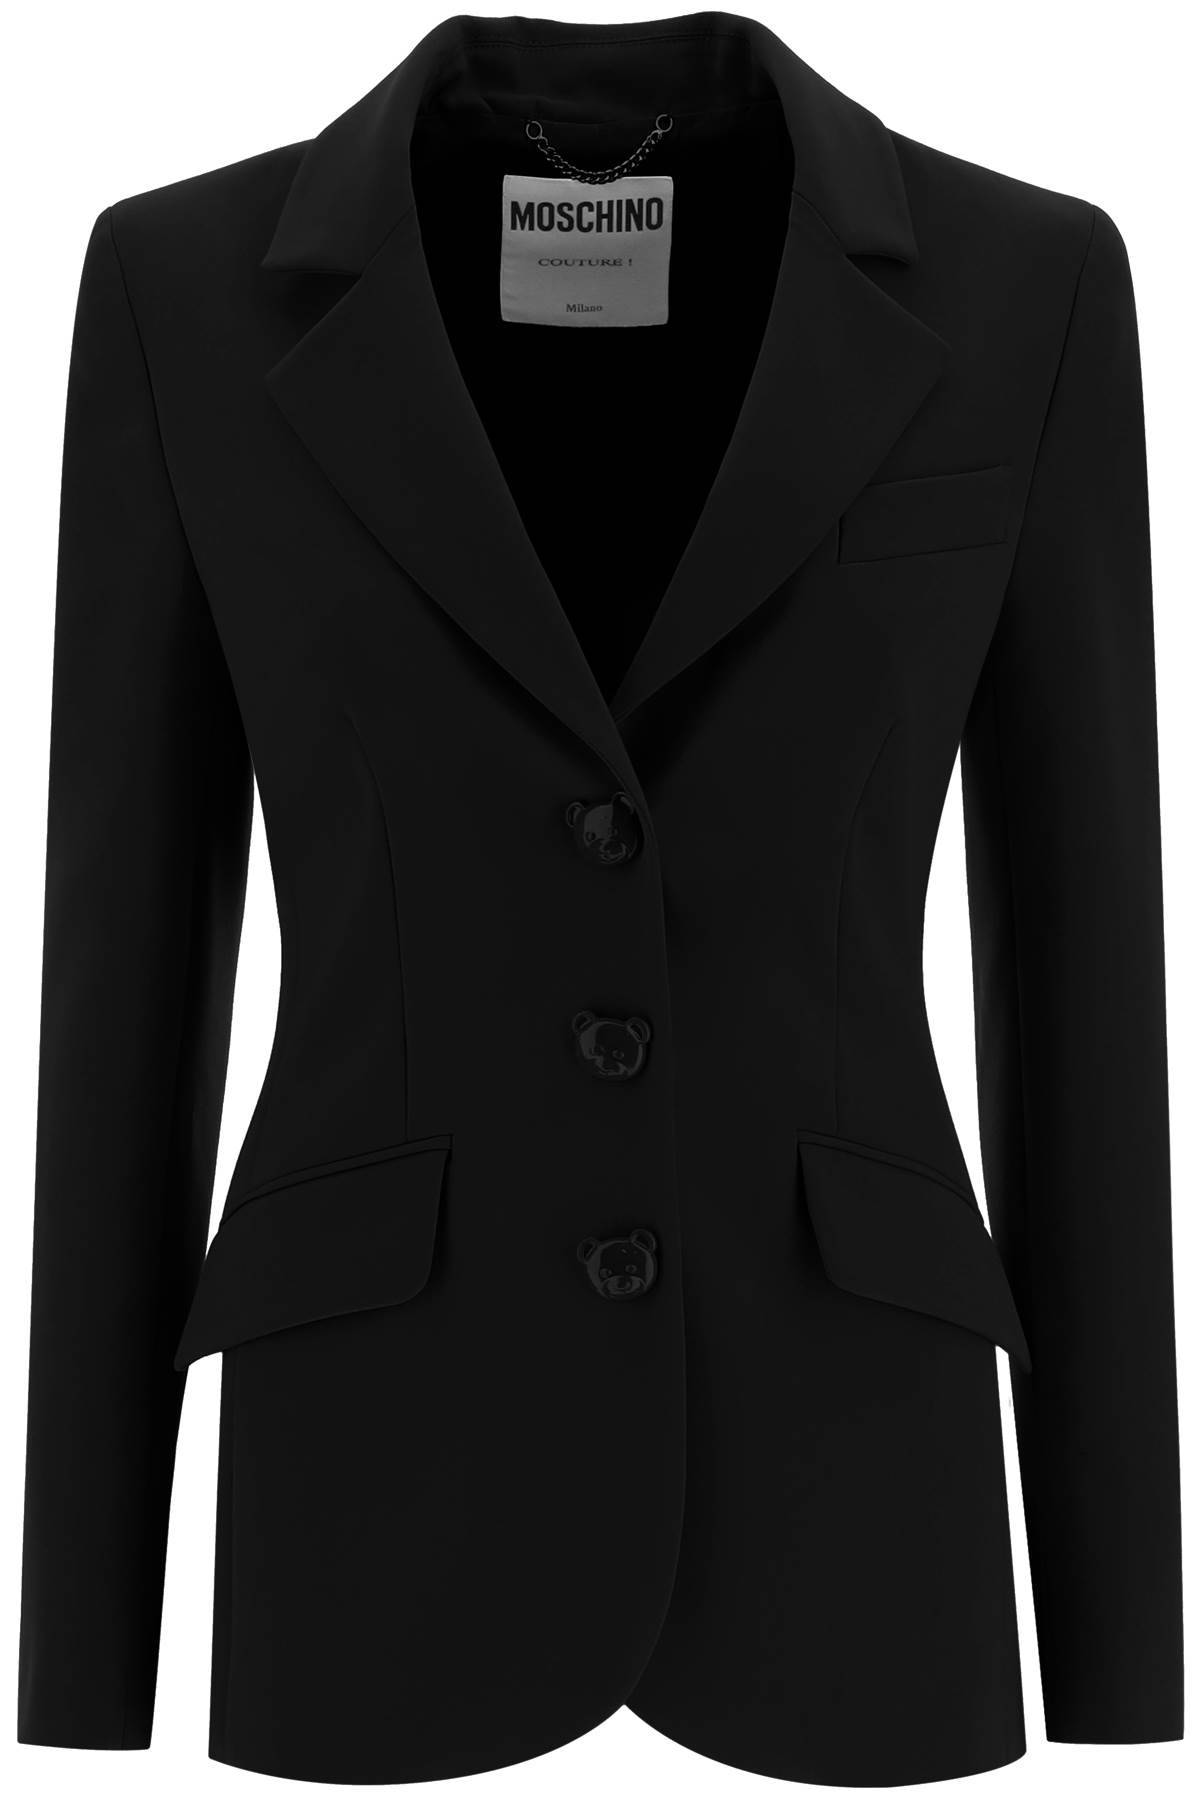 Moschino Blazer With Teddy Bear Buttons In Black